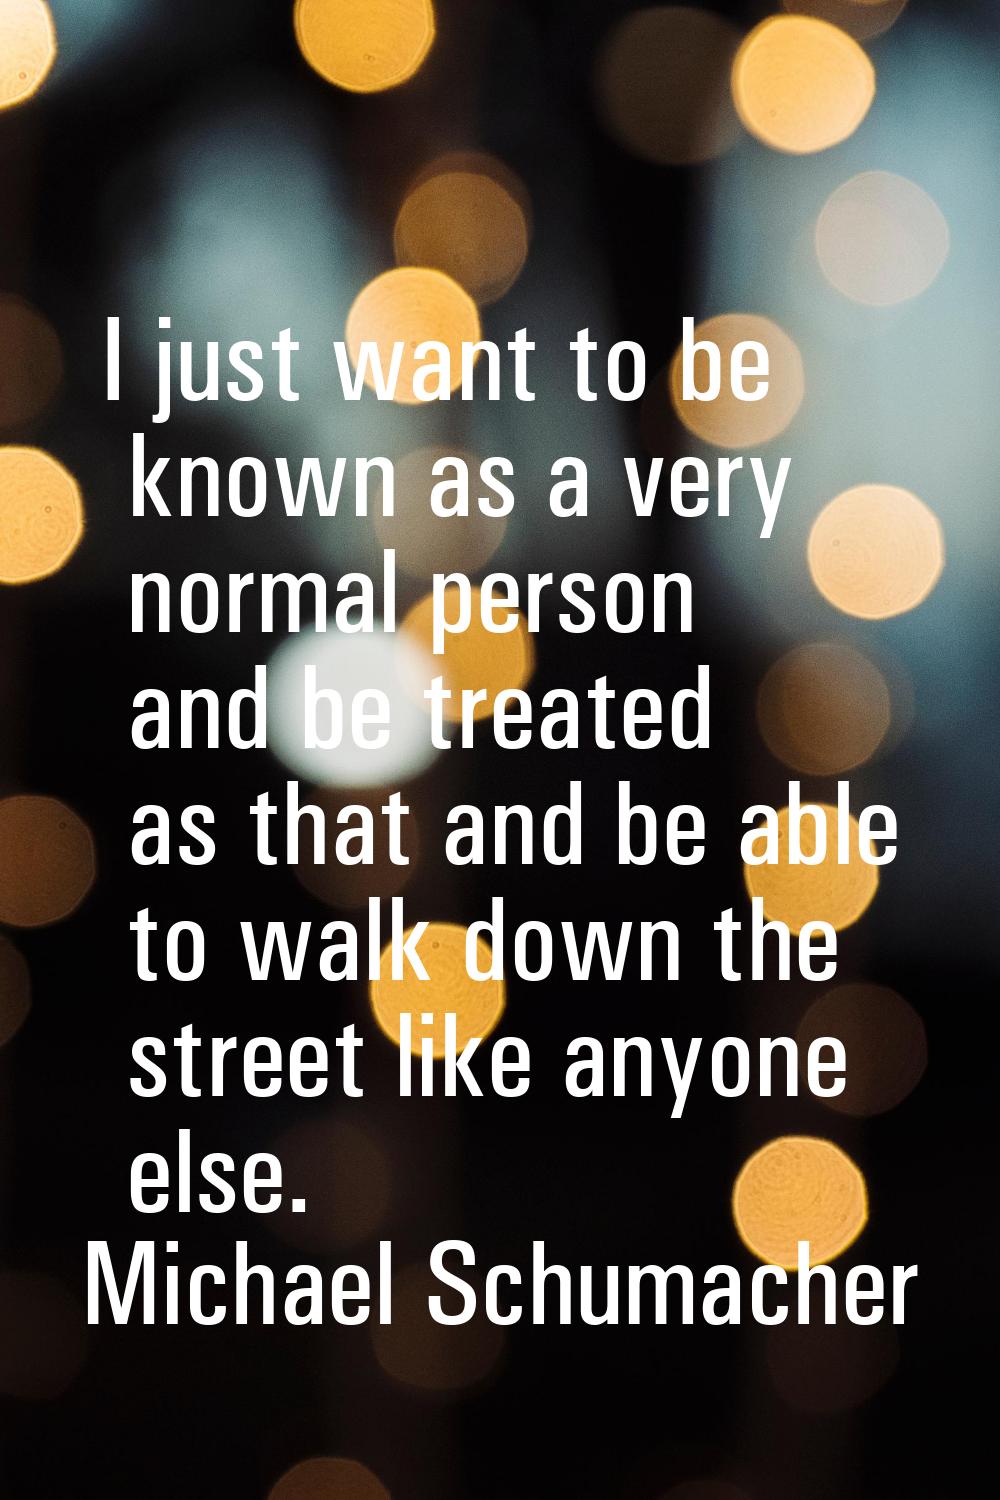 I just want to be known as a very normal person and be treated as that and be able to walk down the